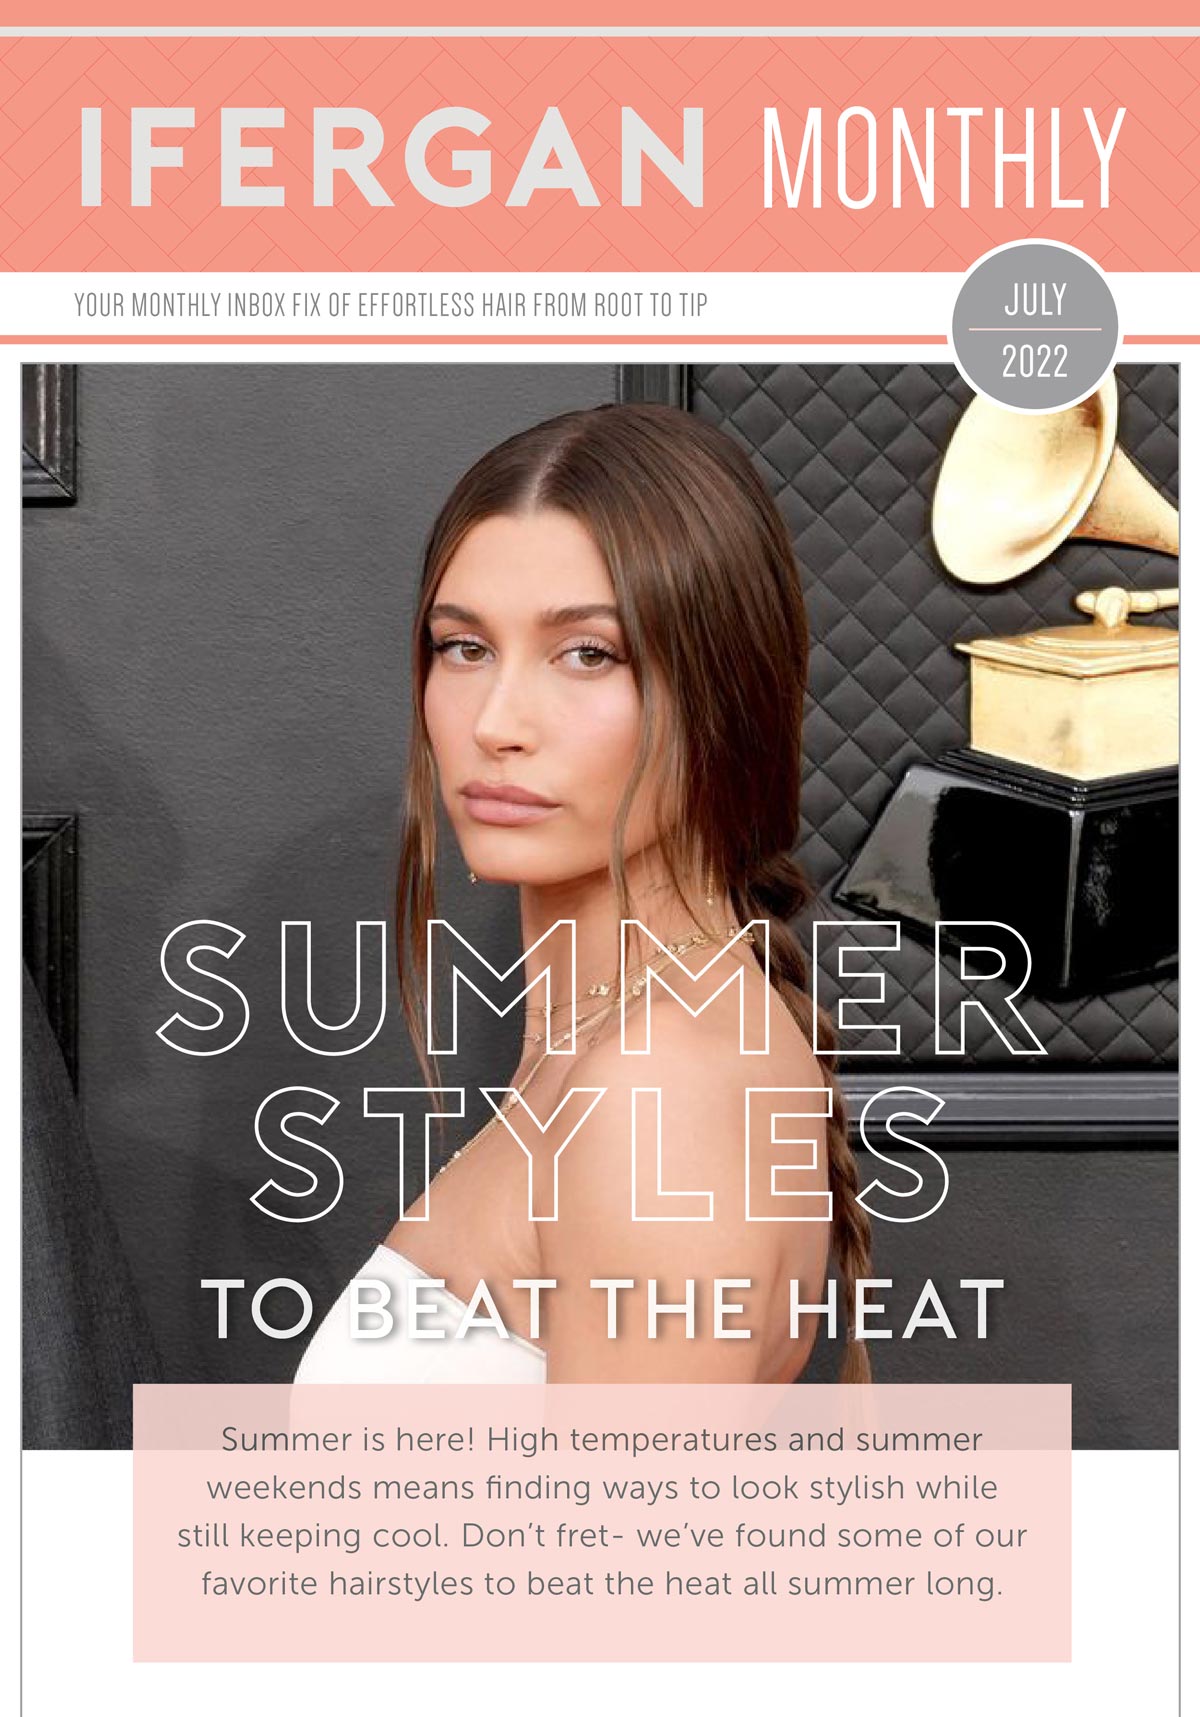 Charles Ifergan - July 2022 Newsletter - Summer Styles to Beat The Heat Summer is here! High temperatures and summer weekends means finding ways to look stylish while still keeping cool. Don’t fret- we've found some of our favorite hairstyles to beat the heat all summer long.